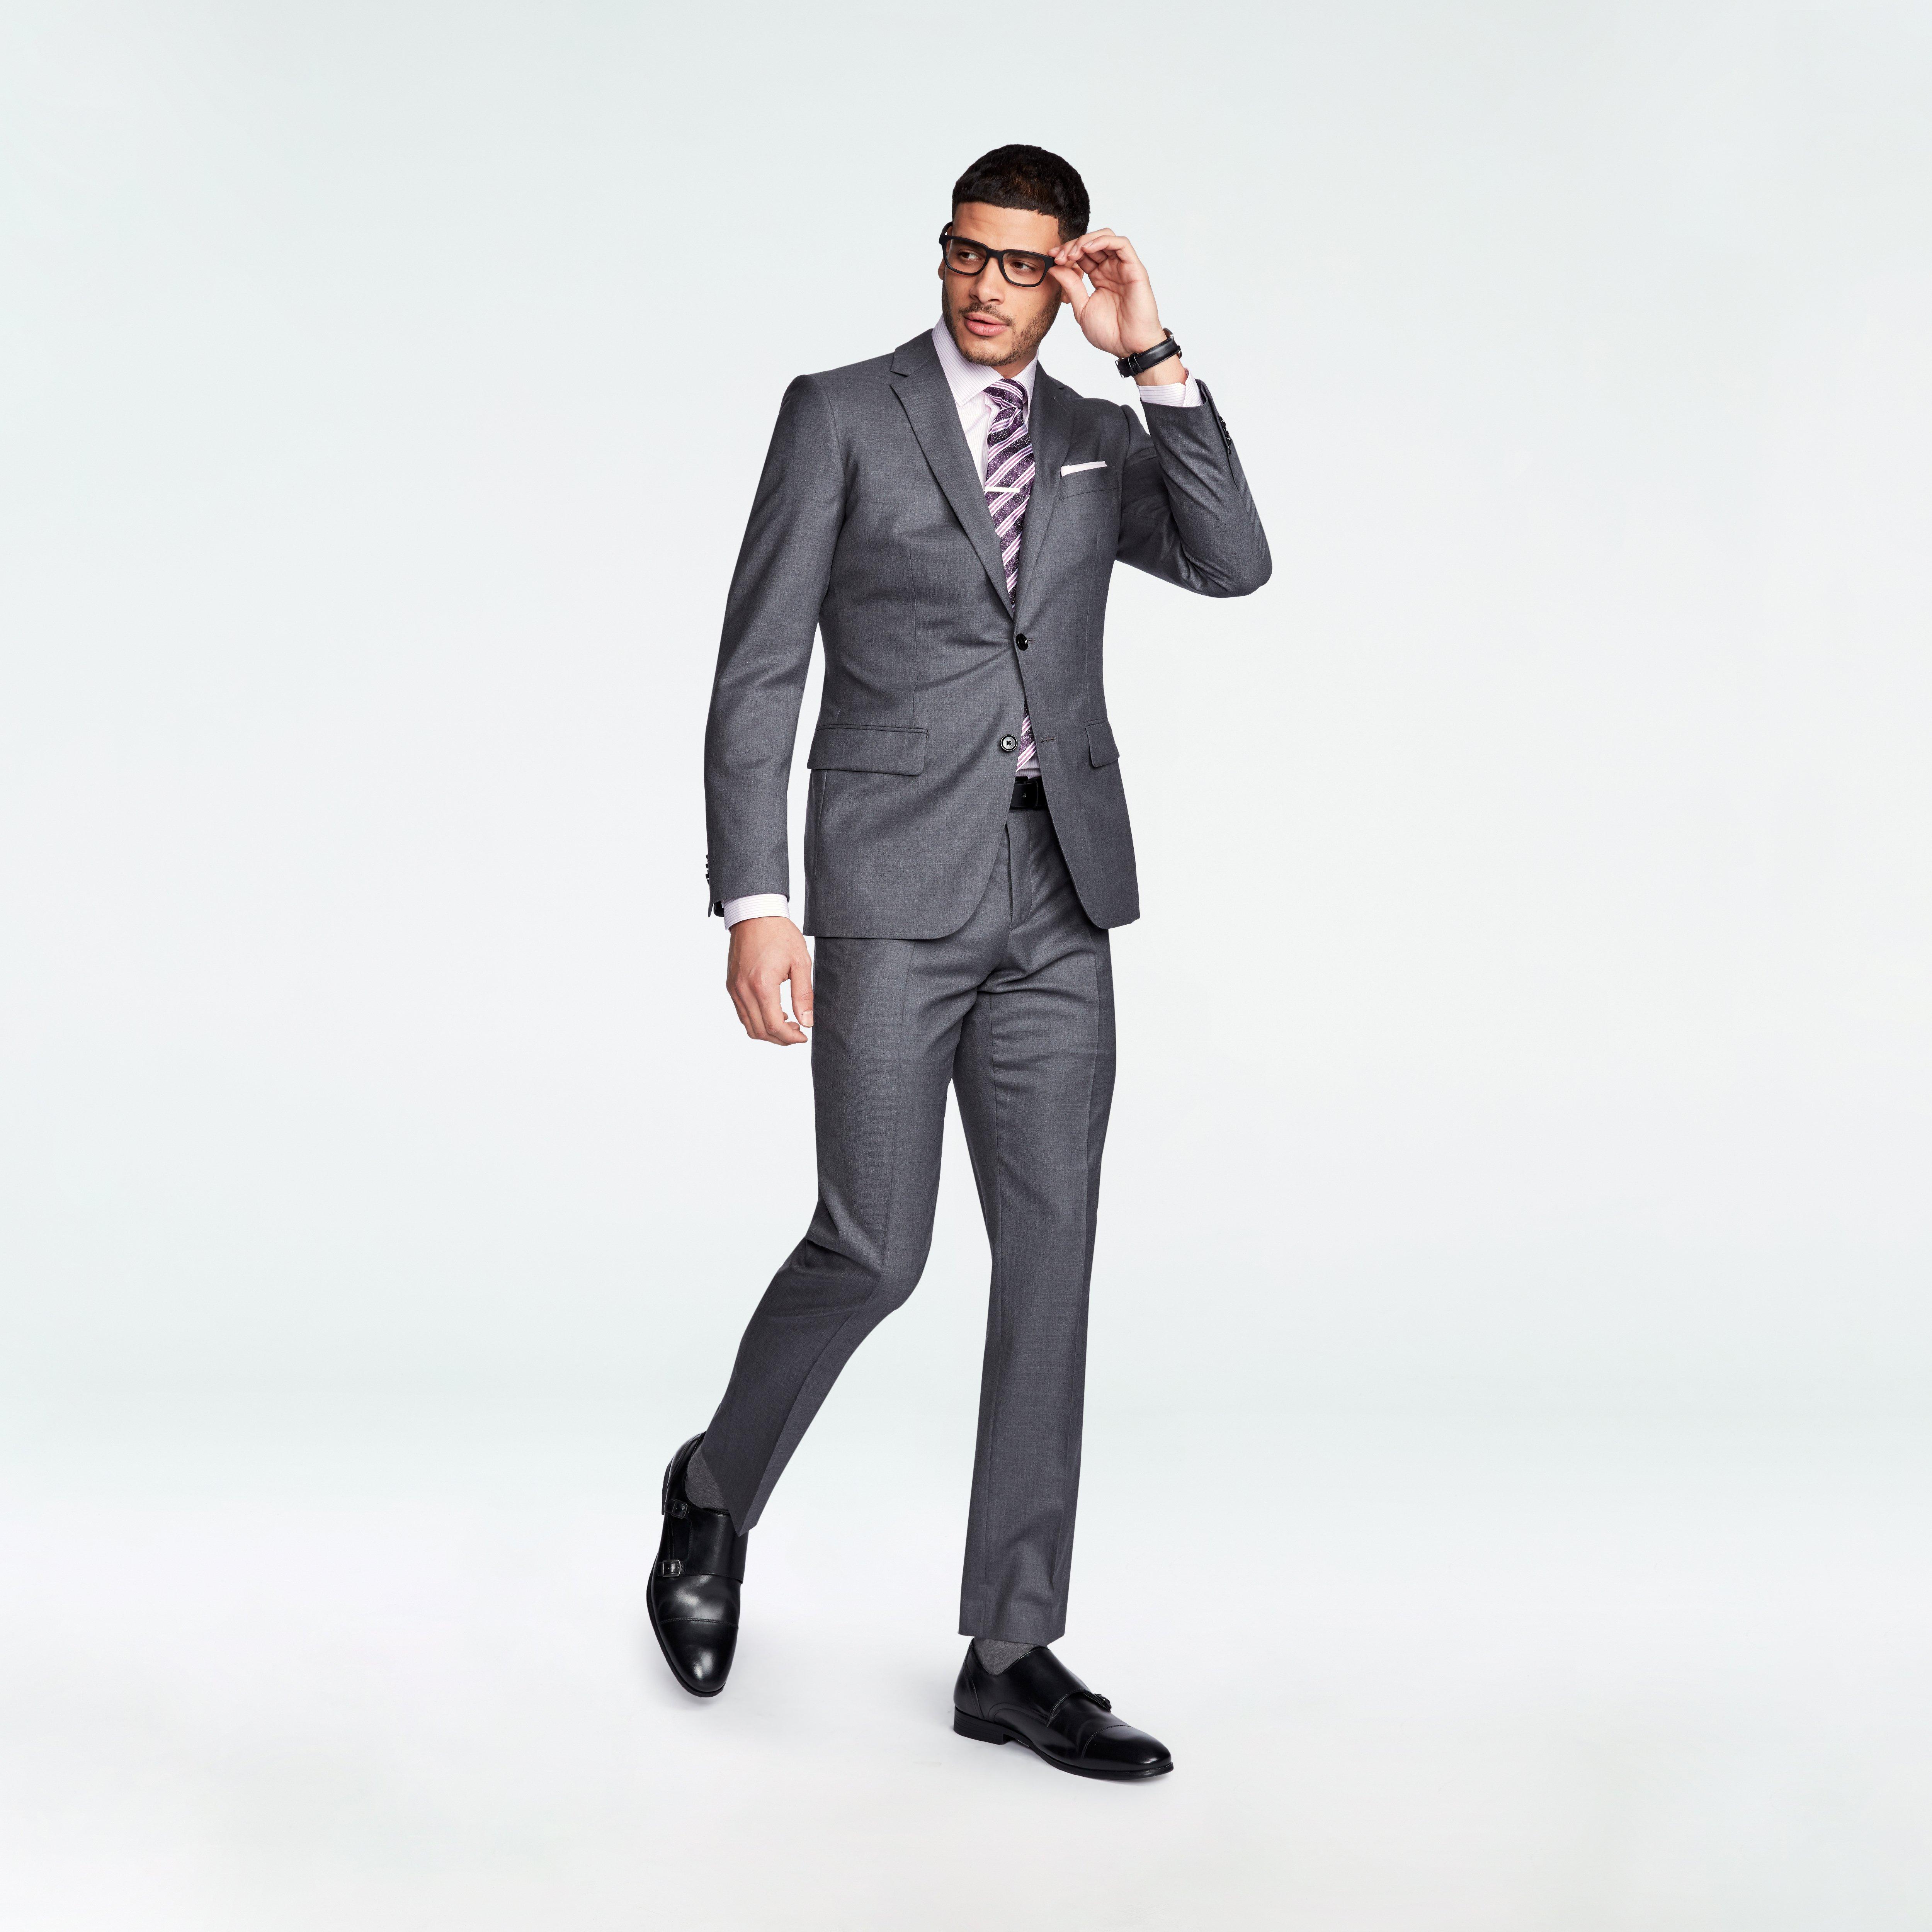 How To Wear A Grey Suit